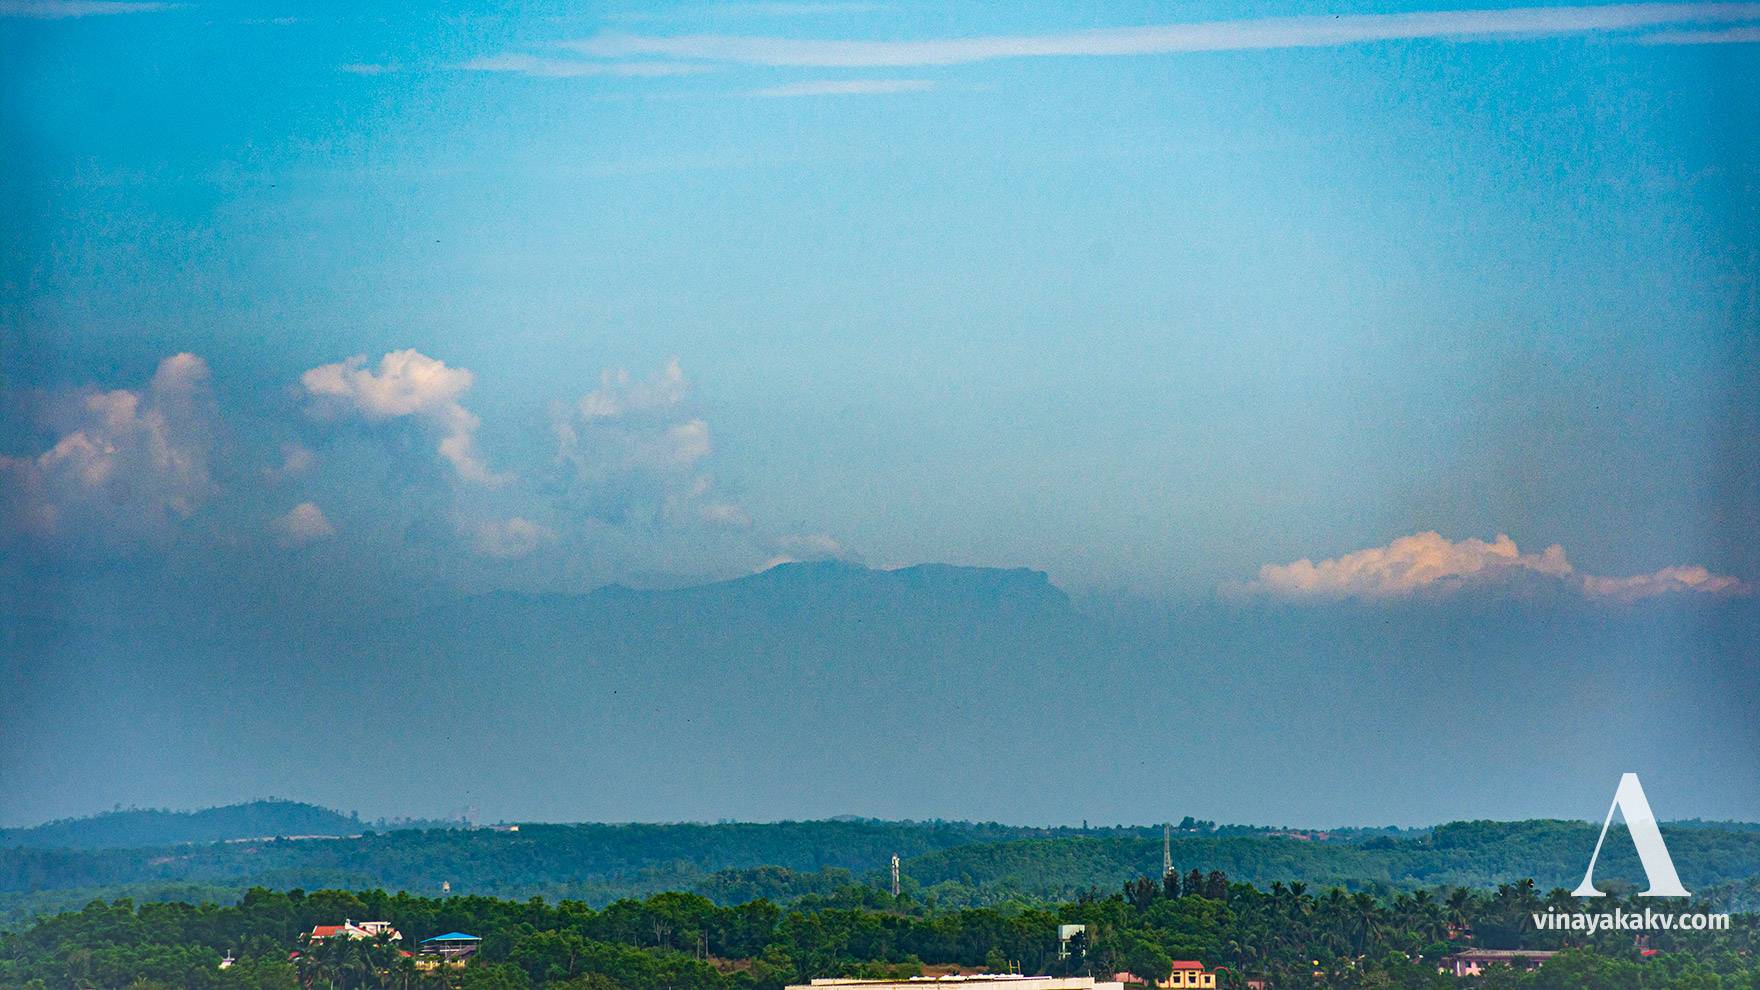 If the haze line is low, it enables to see the things above it -- In this case, the Kuduremukha mountain.